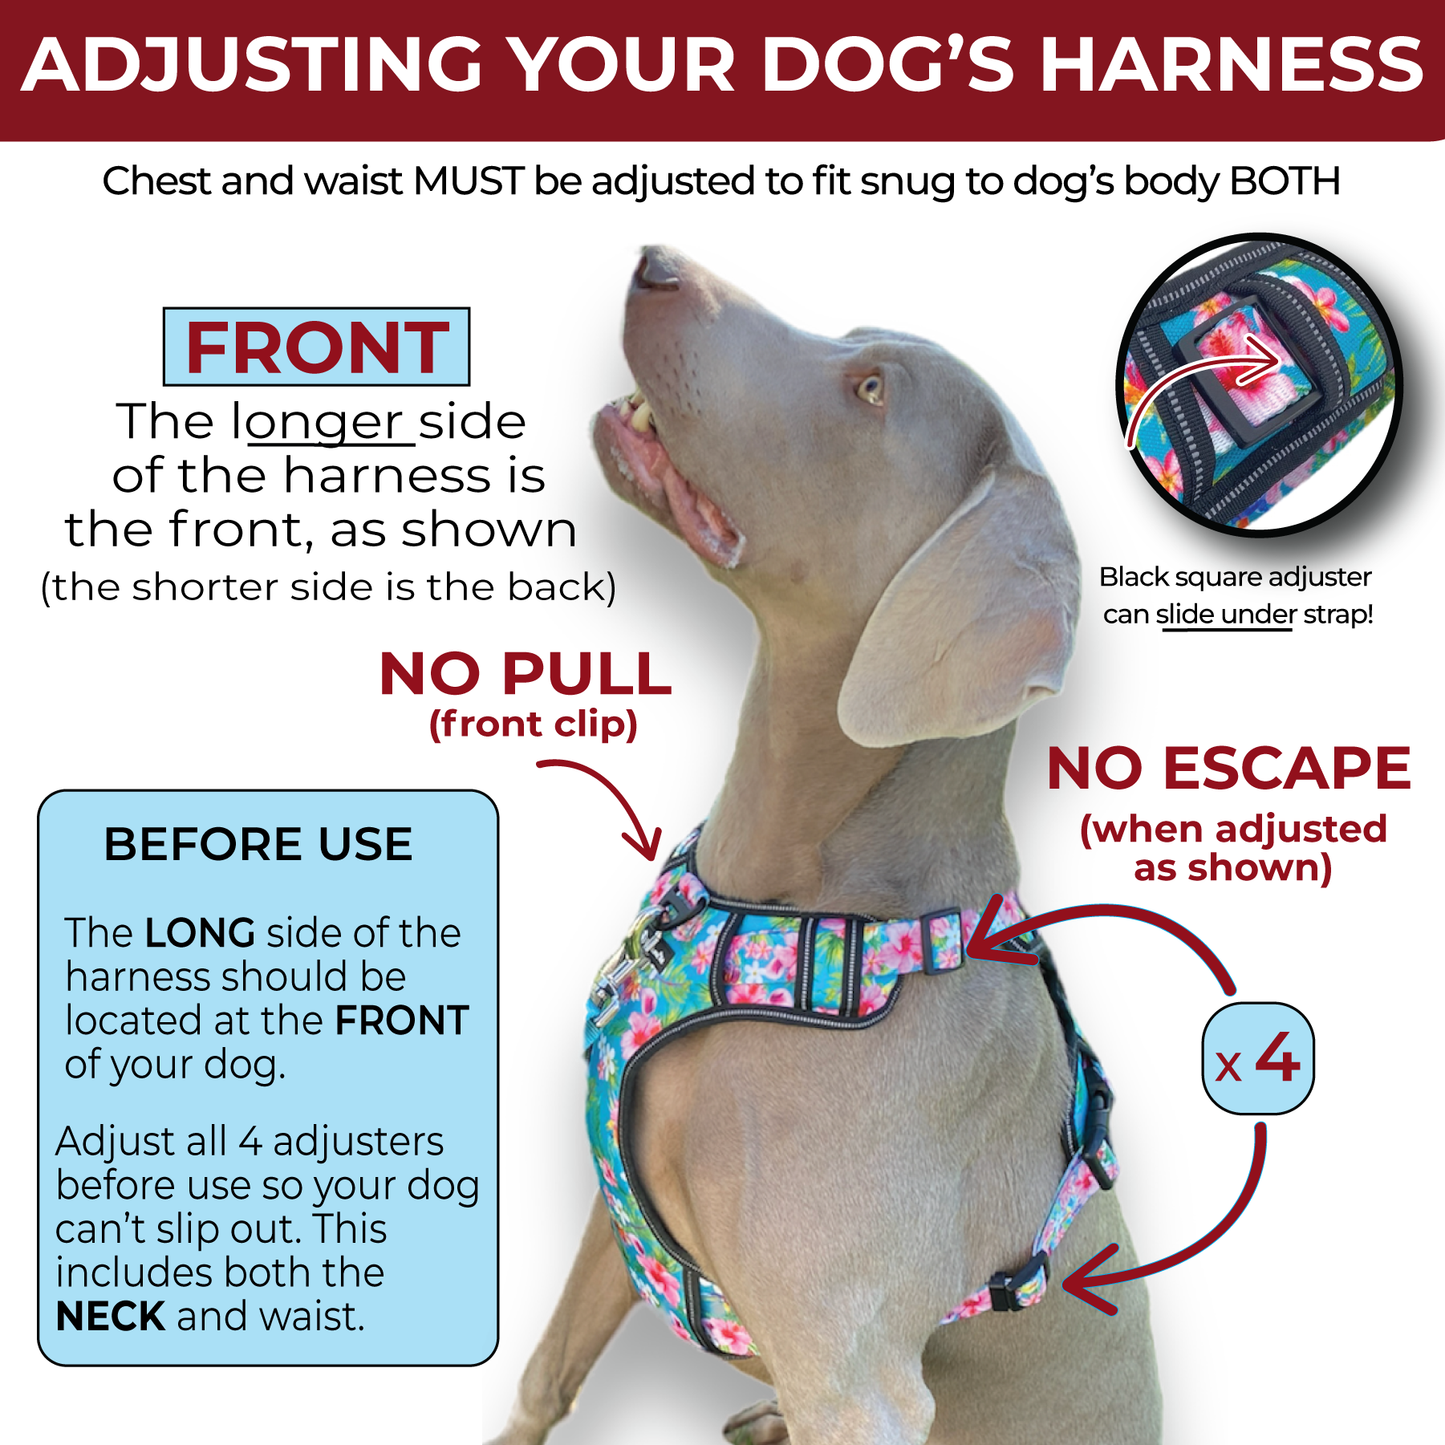 adjustment instruction for a no escape dog harness from fearless pt